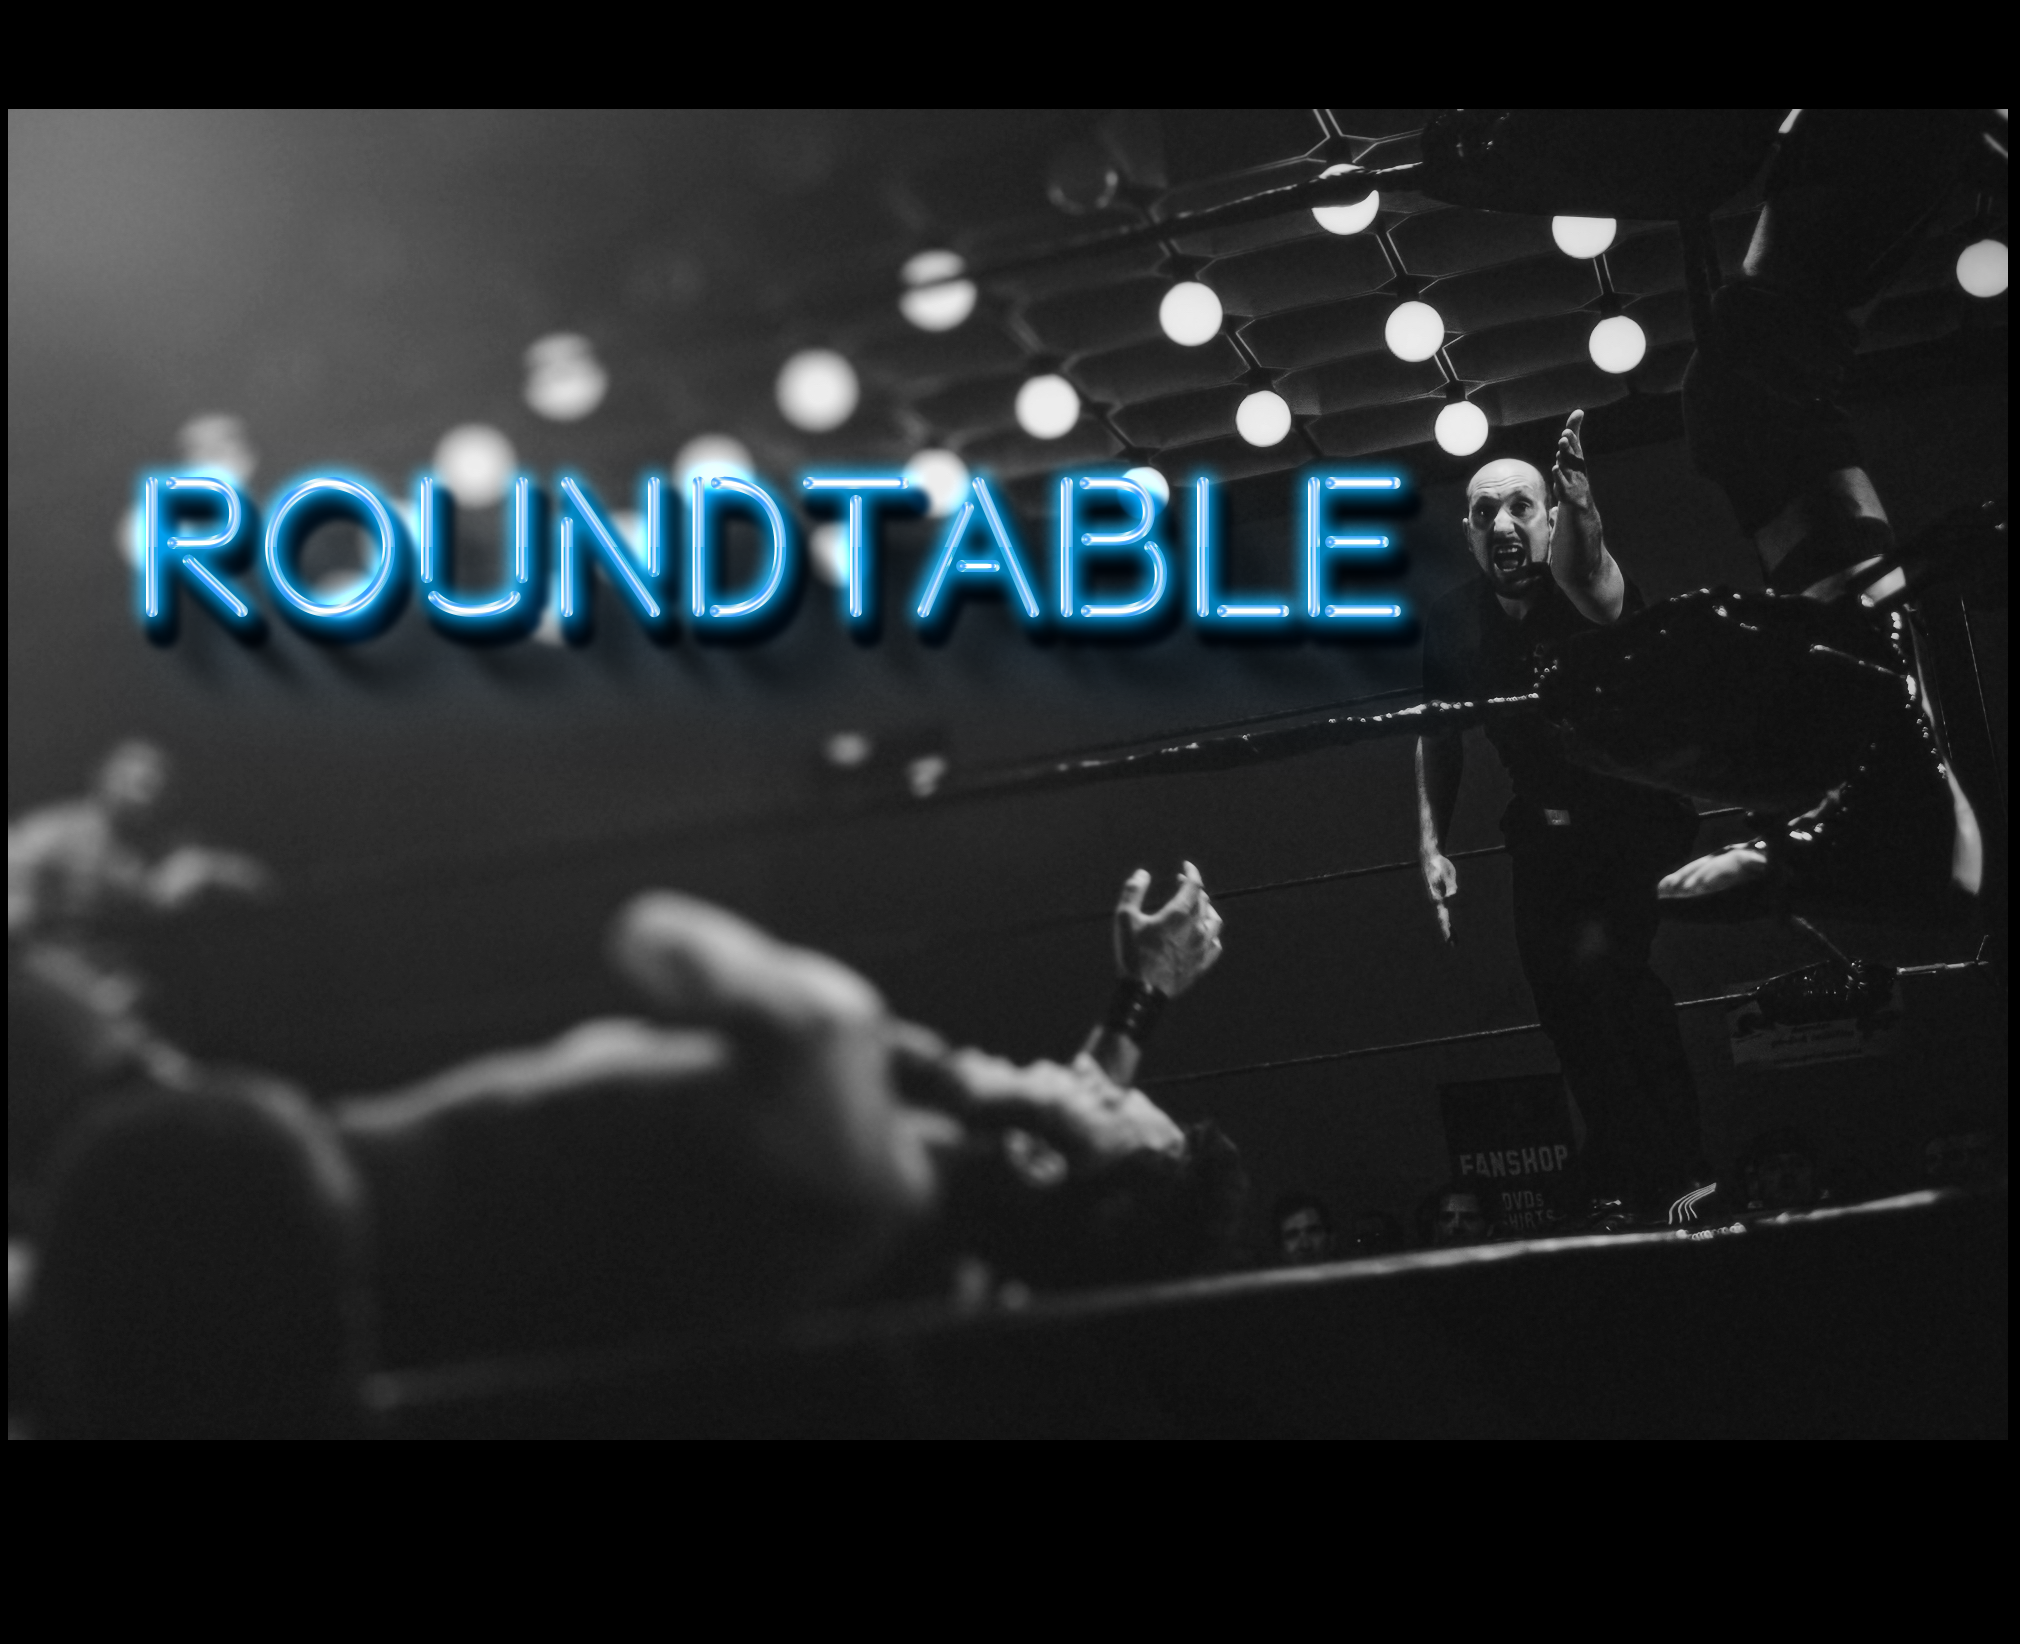 AiPT! Roundtable: On Pro Wrestling's Spot in Geek Culture